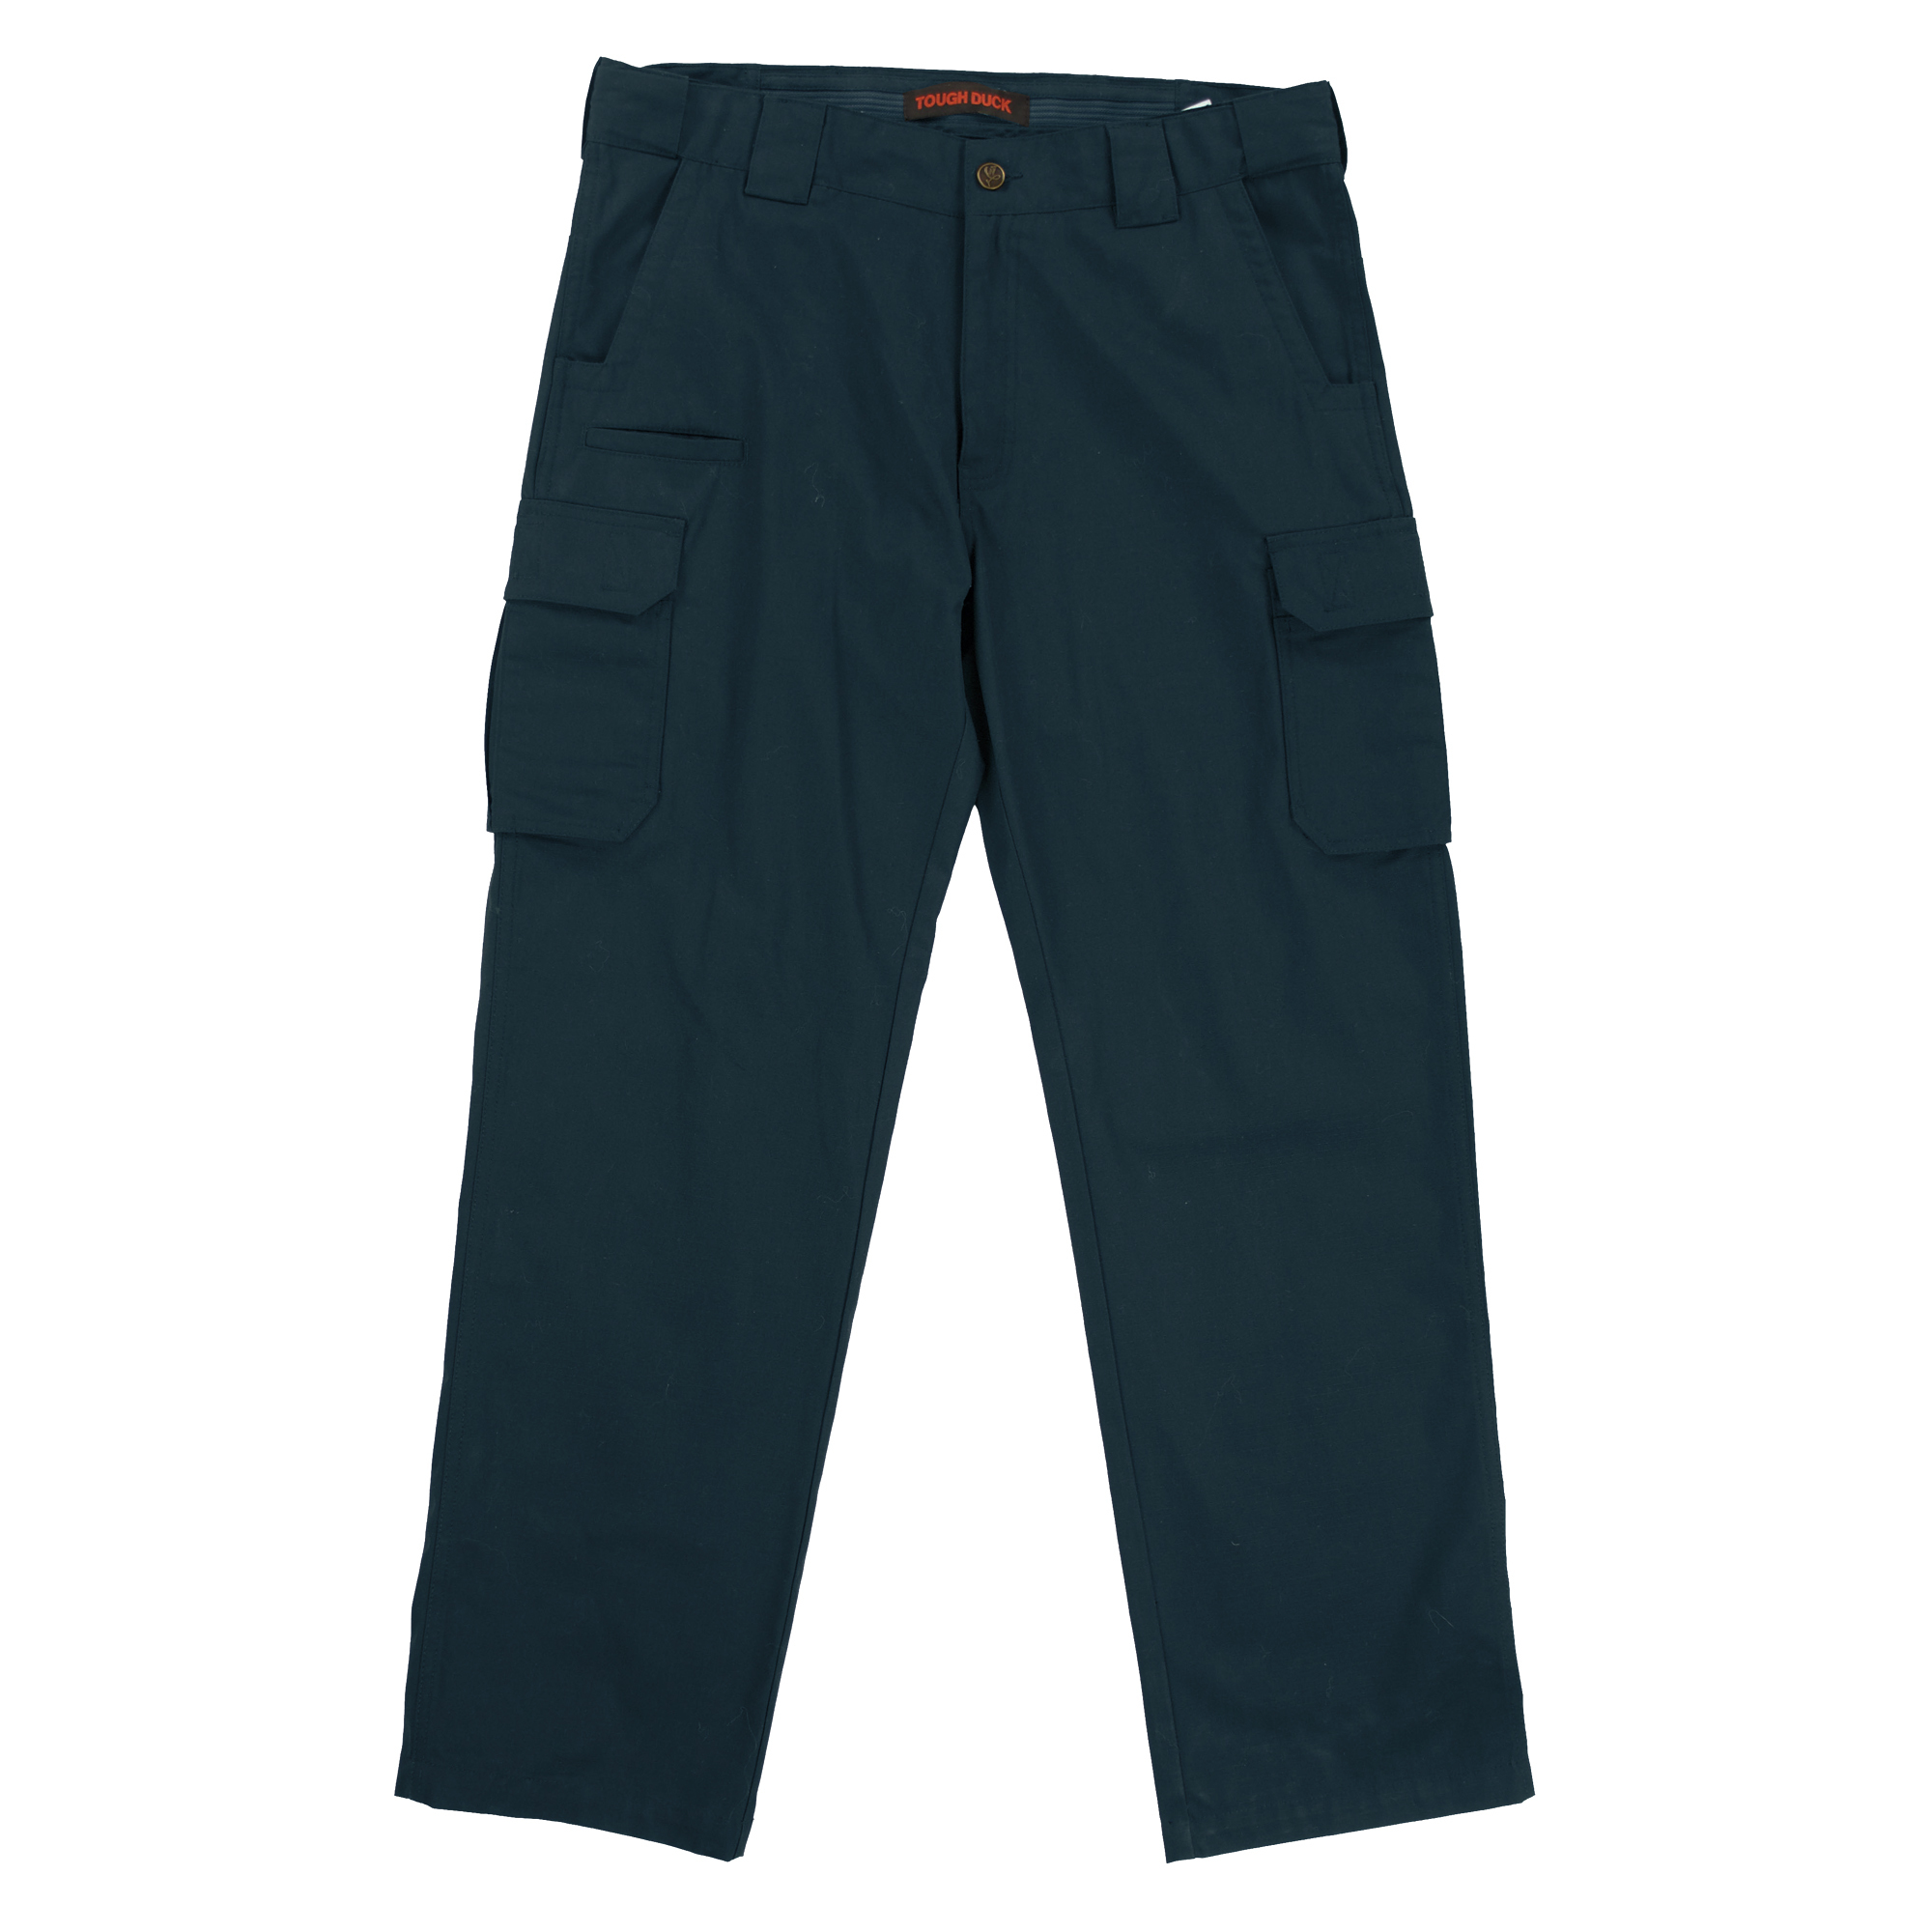 Tough Duck, Ripstop Cargo Pant, Waist 46 in, Inseam 30 in, Color Navy, Model WP110